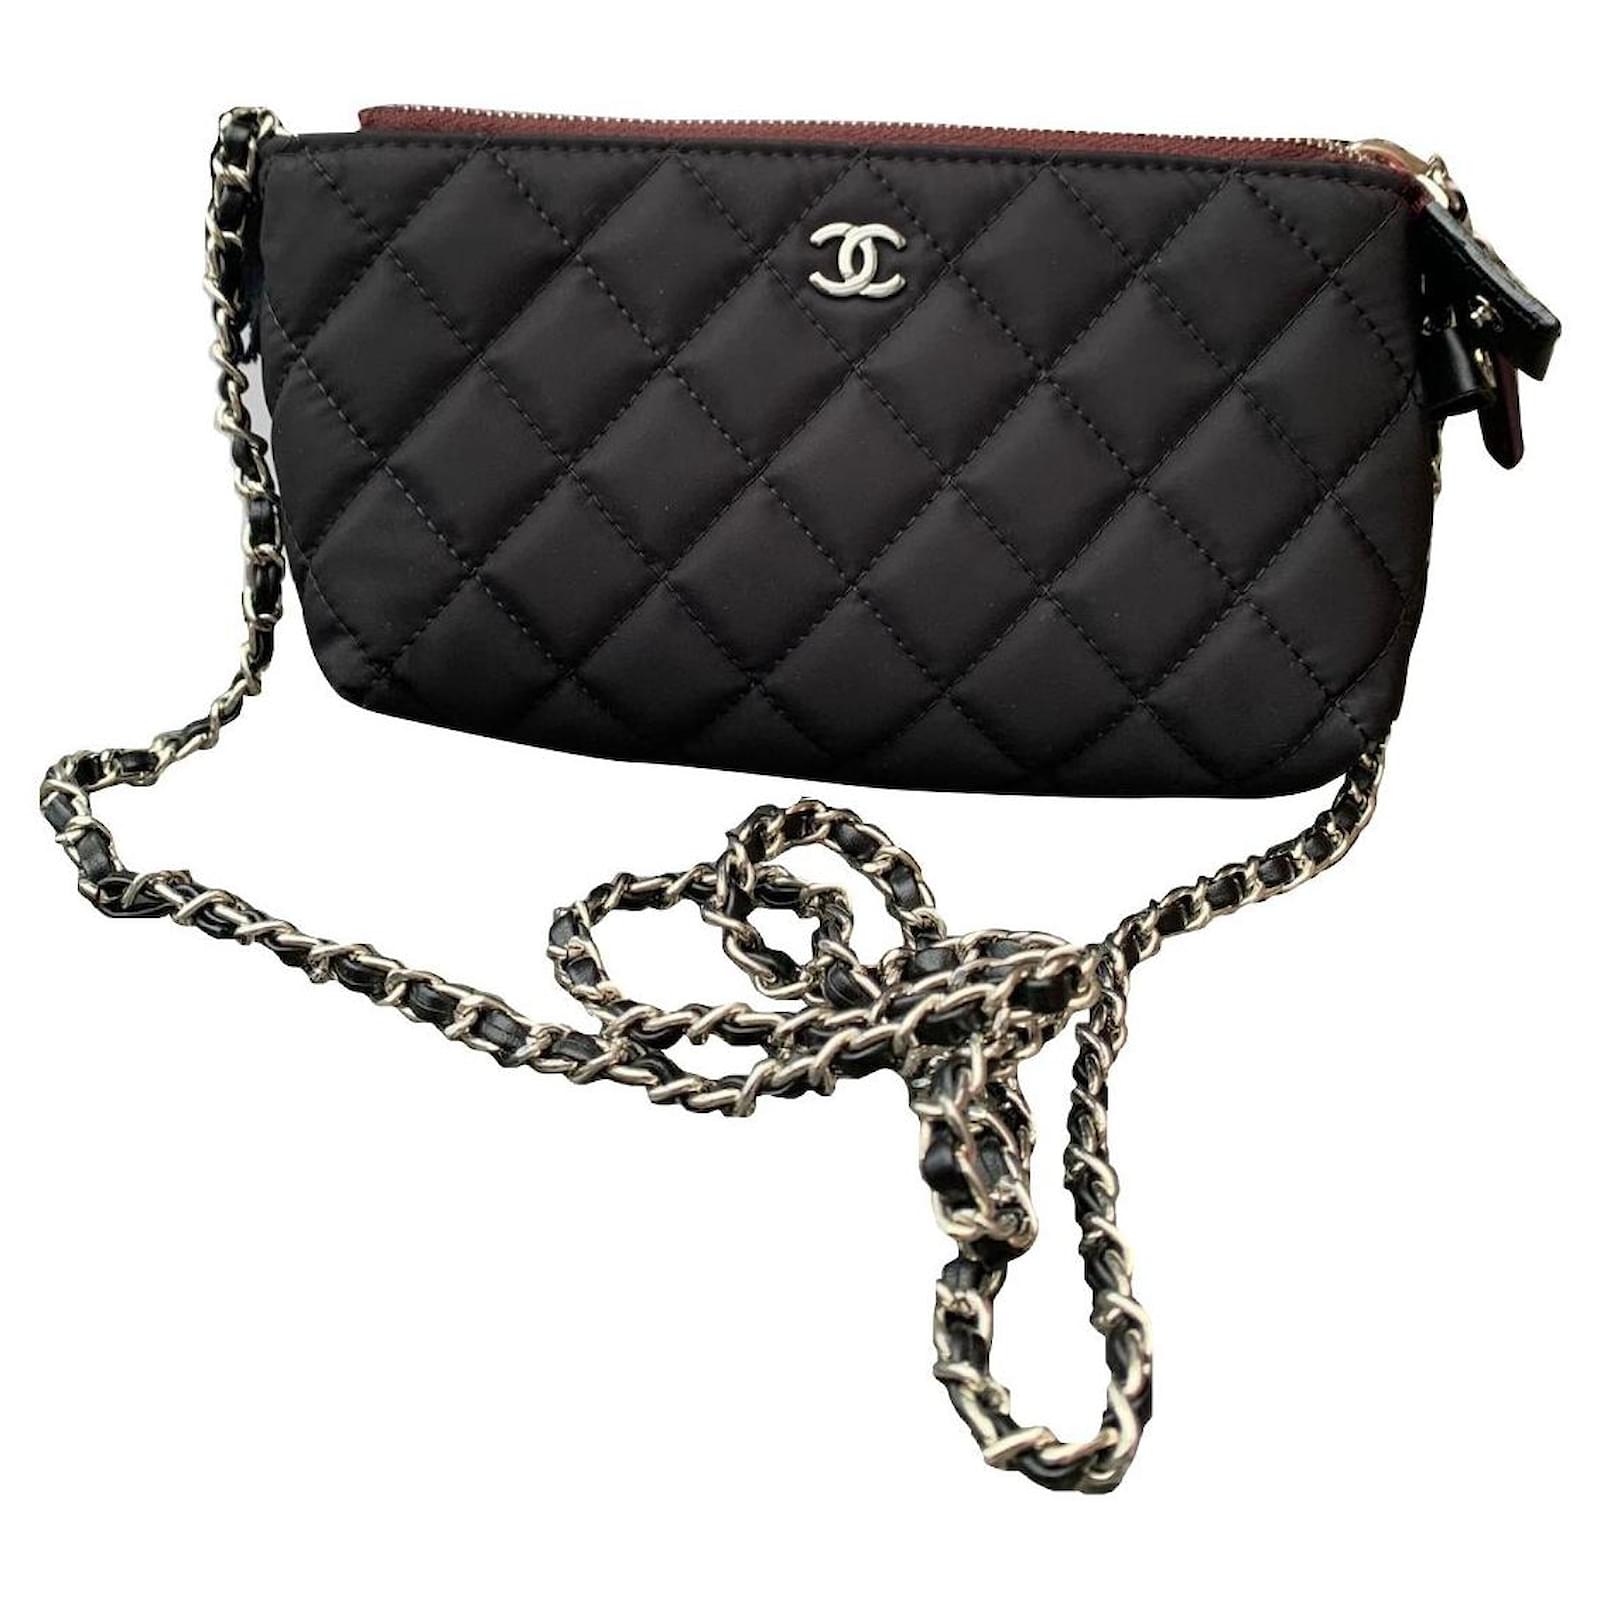 Clutch Bags Chanel